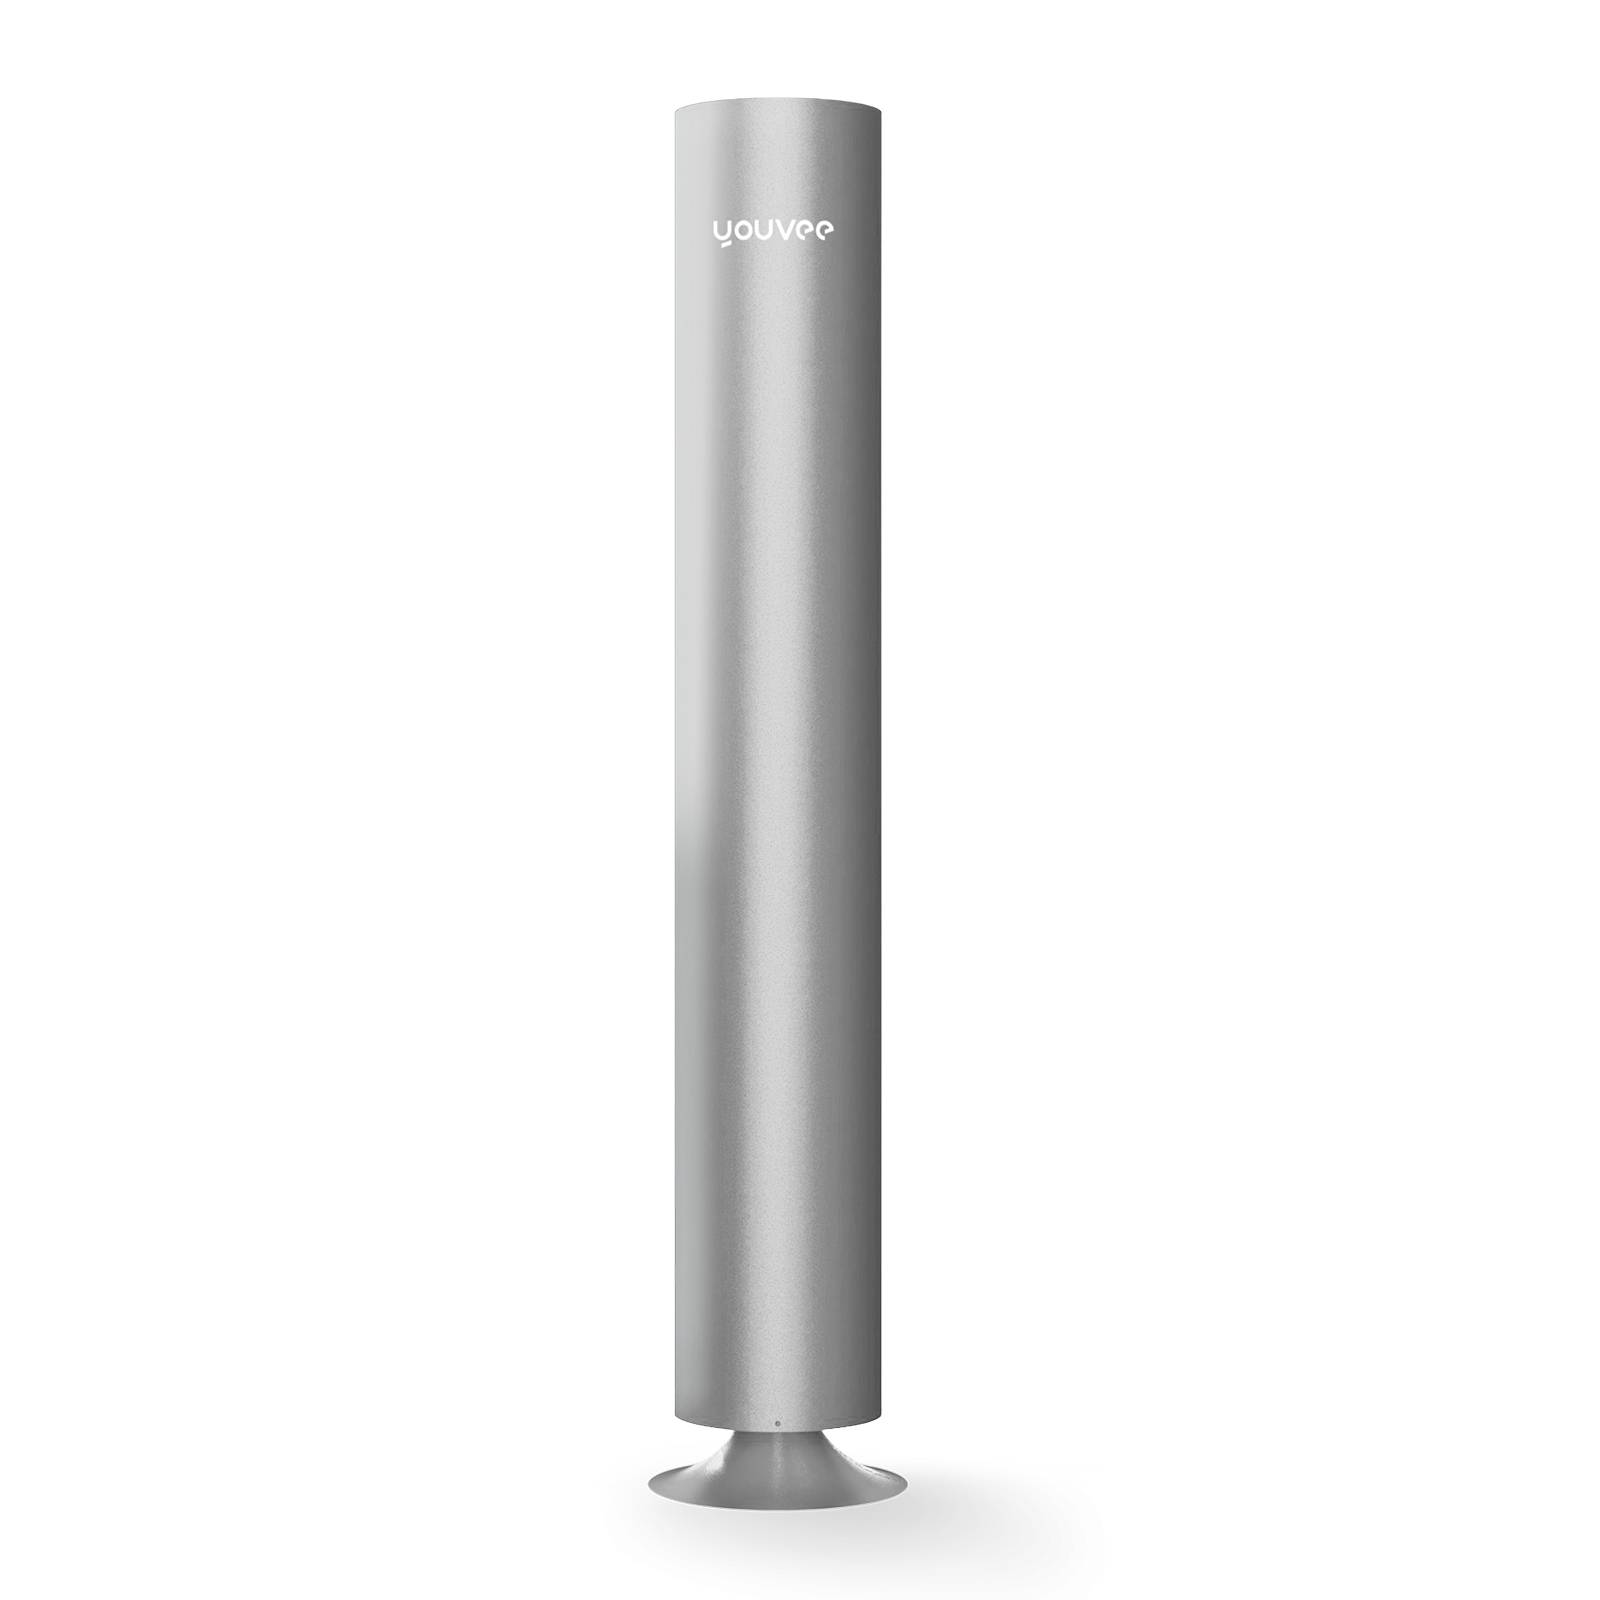 youvee UV-C air purifier, silver